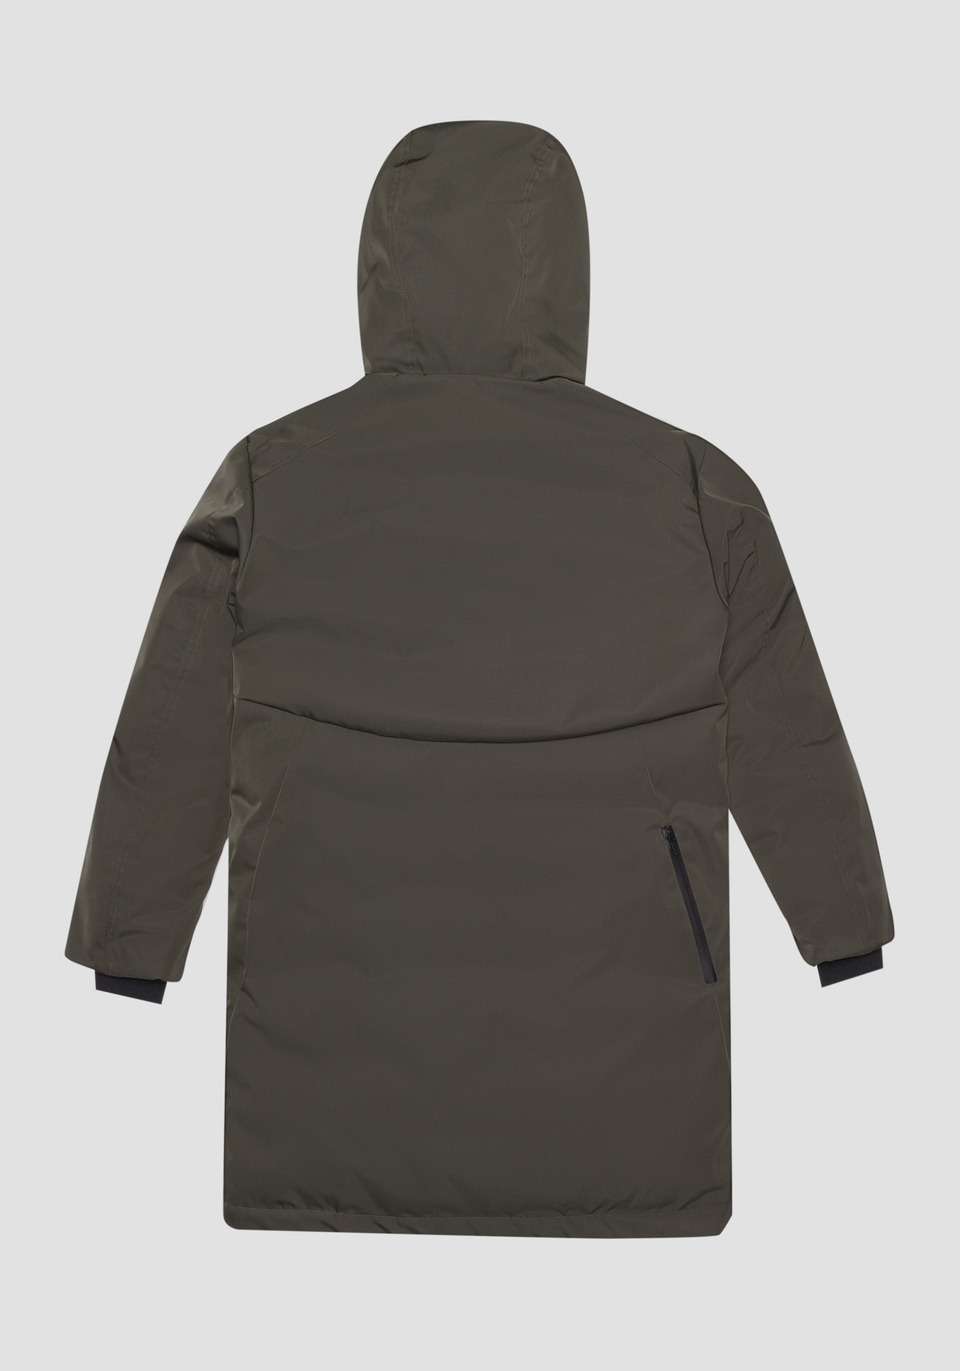 REGULAR FIT JACKET WITH HOOD IN TECHNICAL FABRIC WITH ECO-SUSTAINABLE PADDING - Antony Morato Online Shop